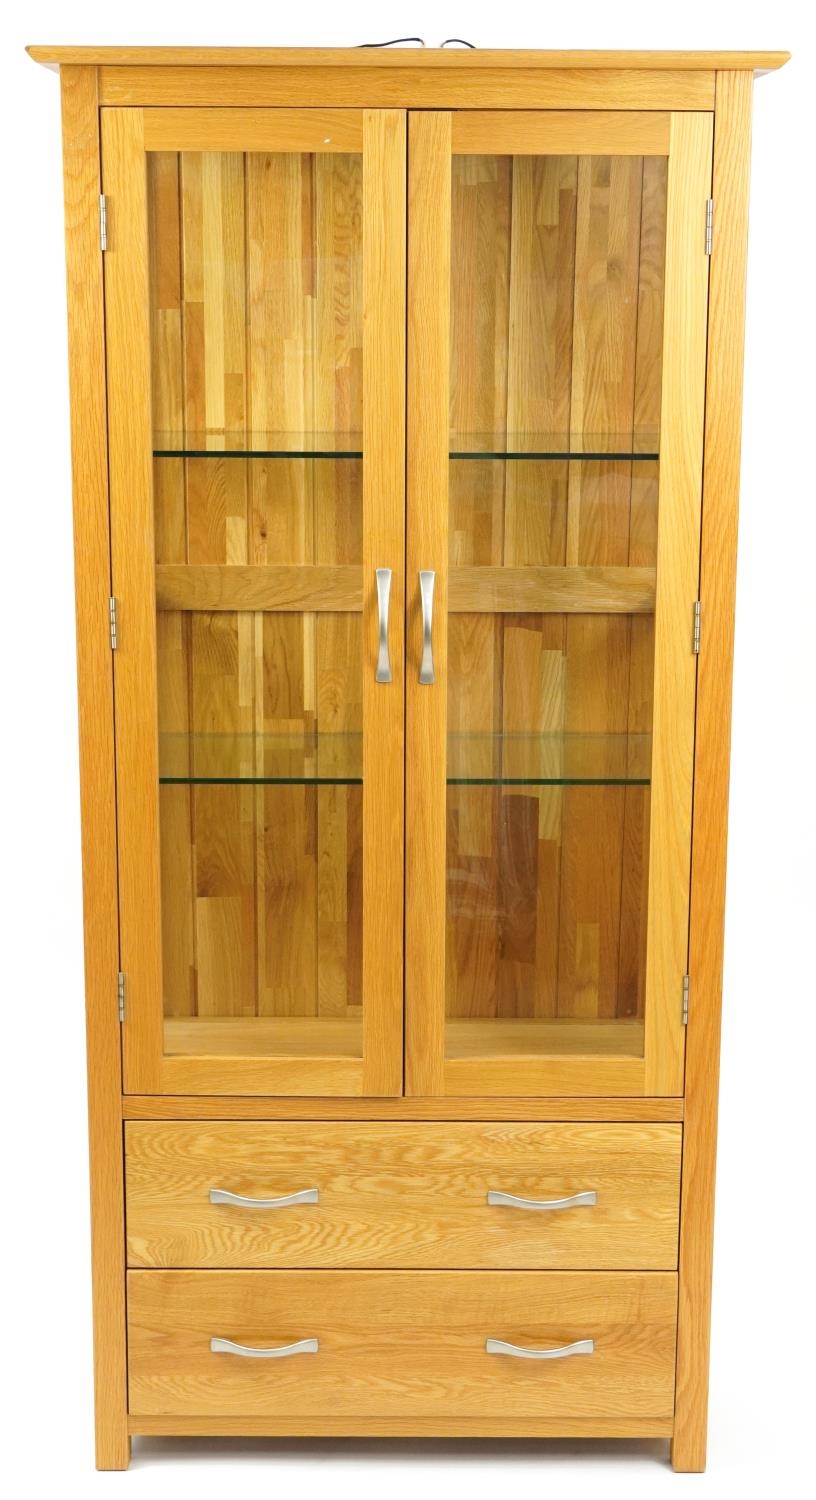 Contemporary light oak illuminated display cabinet with a pair of glazed doors, two glass shelves